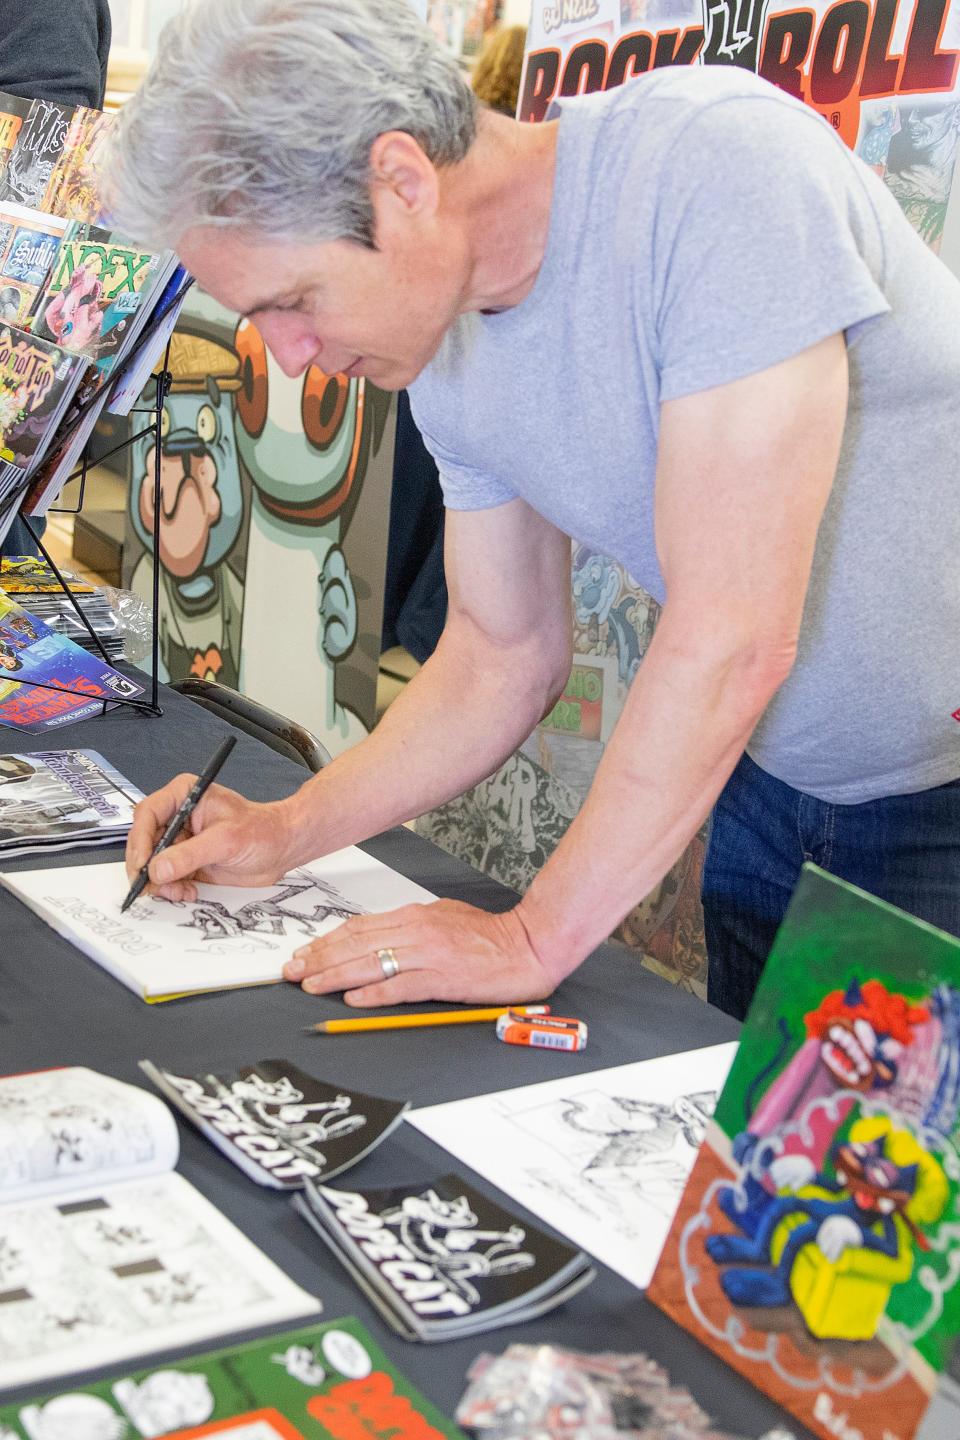 Mike Boheem, from Berkley draws a new sketch of his character Dopecat at the Lodi Comic Con at Lodi Grape Festival on May 8th. Dianne Rose/For The Record